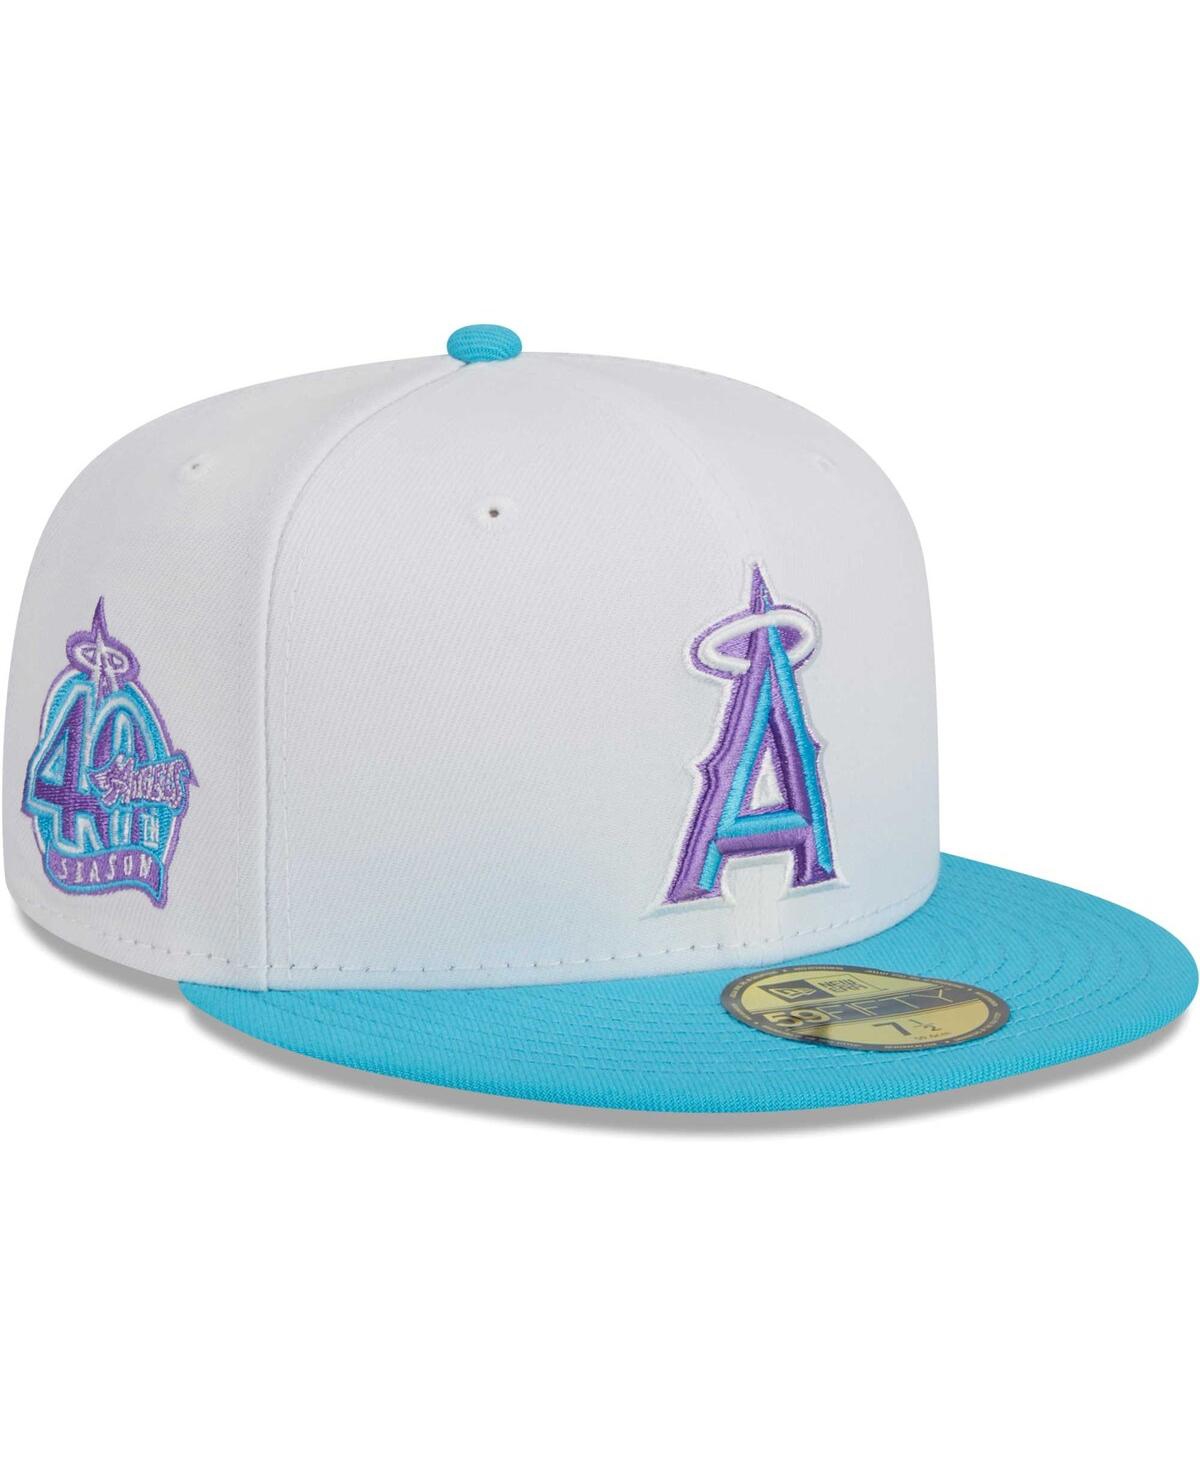 NEW ERA MEN'S NEW ERA WHITE LOS ANGELES ANGELS VICE 59FIFTY FITTED HAT